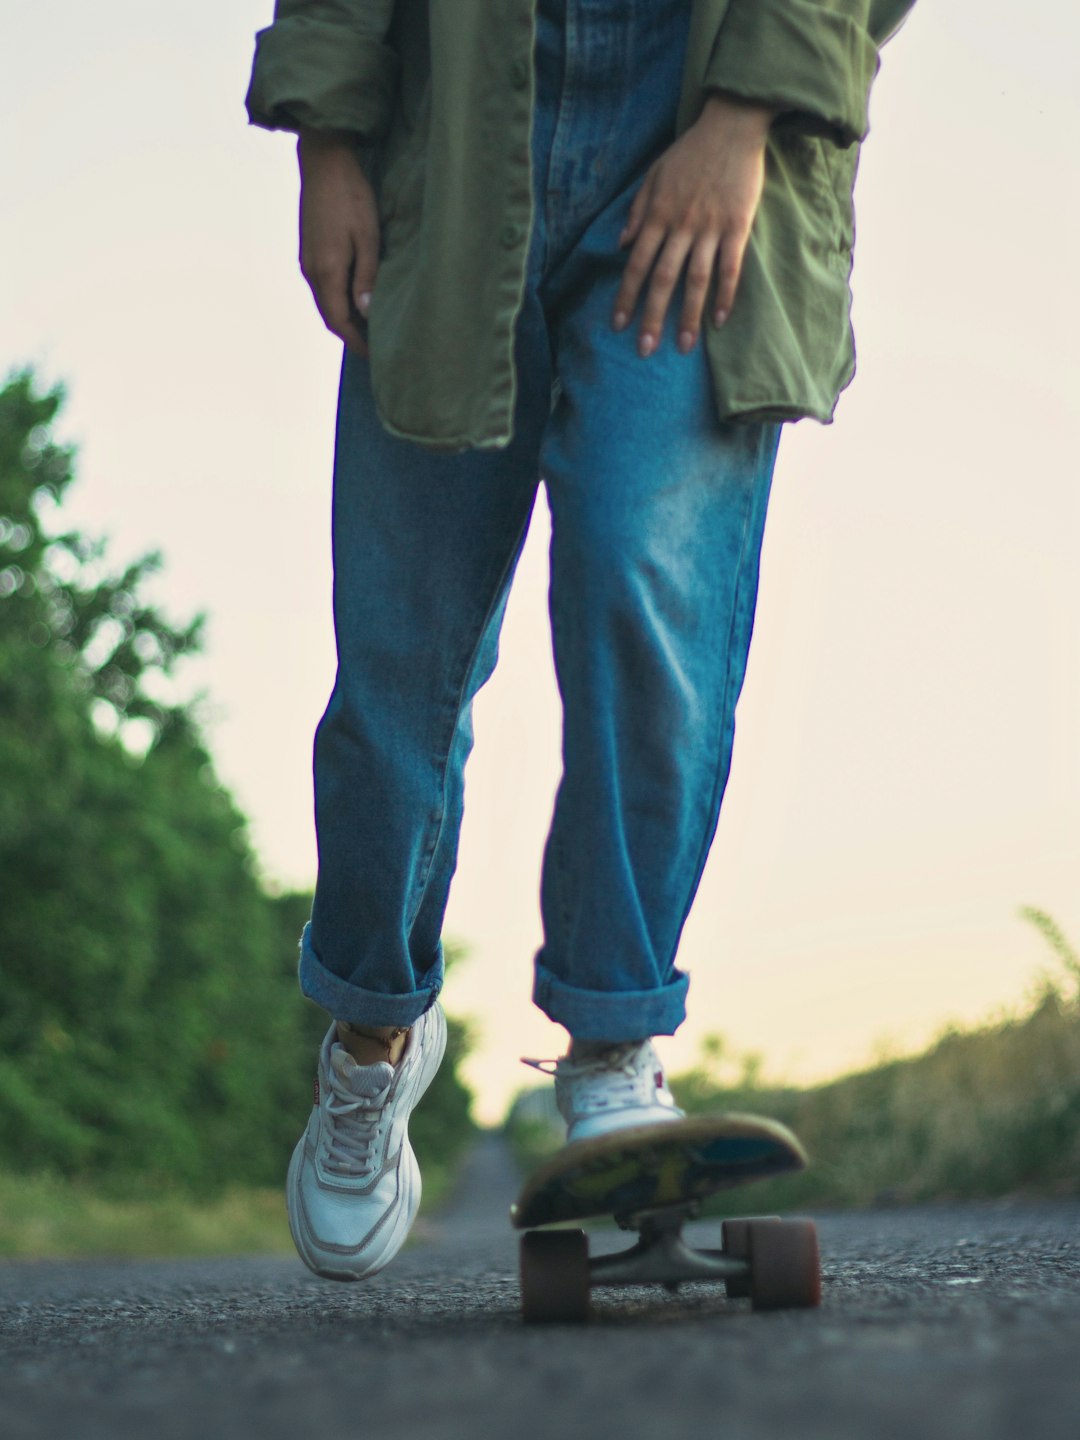 person in blue denim jeans and white sneakers